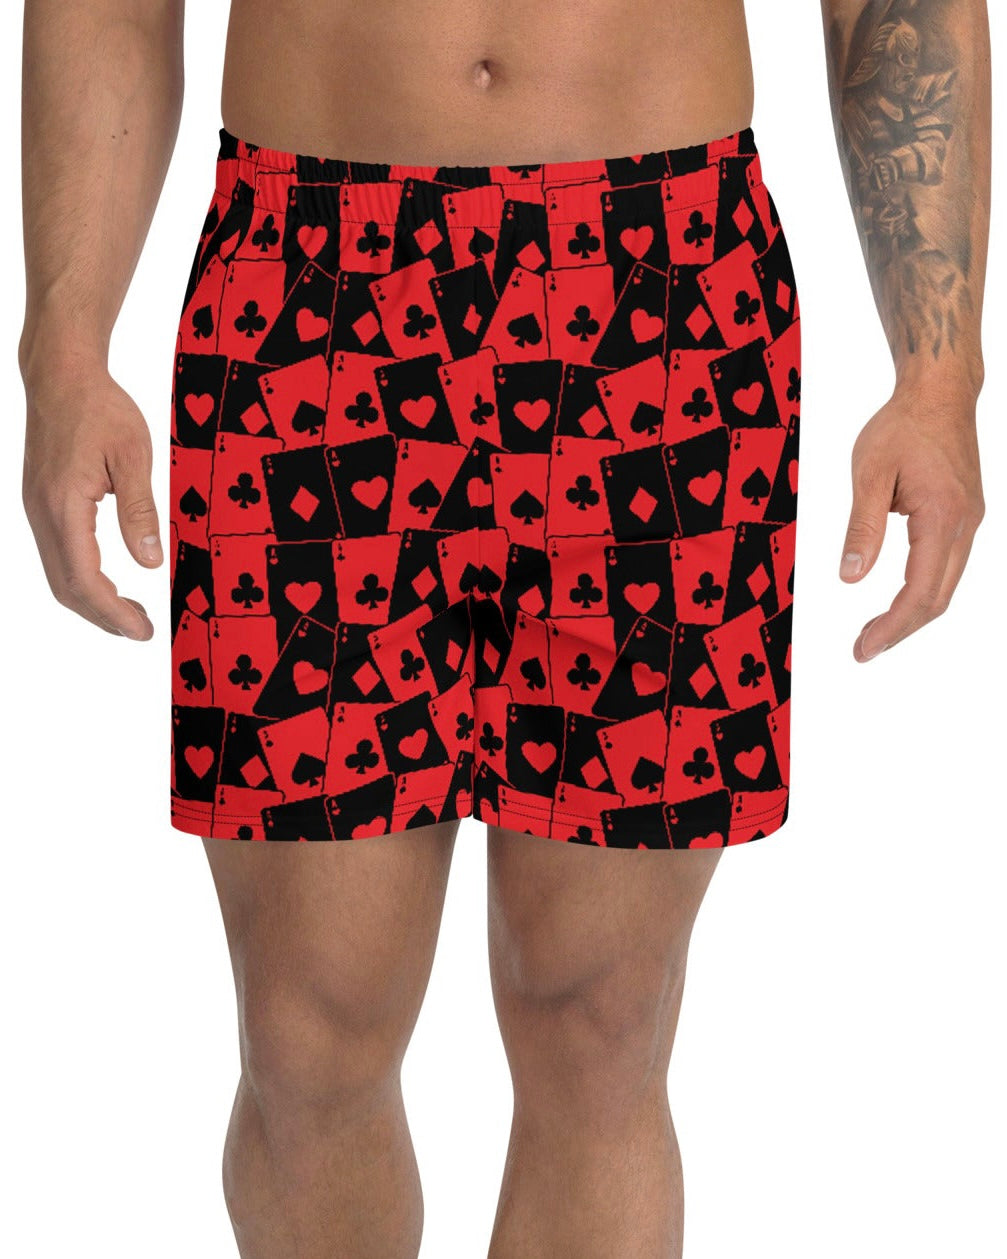 Ace Of Hearts Recycled Athletic Shorts, Athletic Shorts, - One Stop Rave